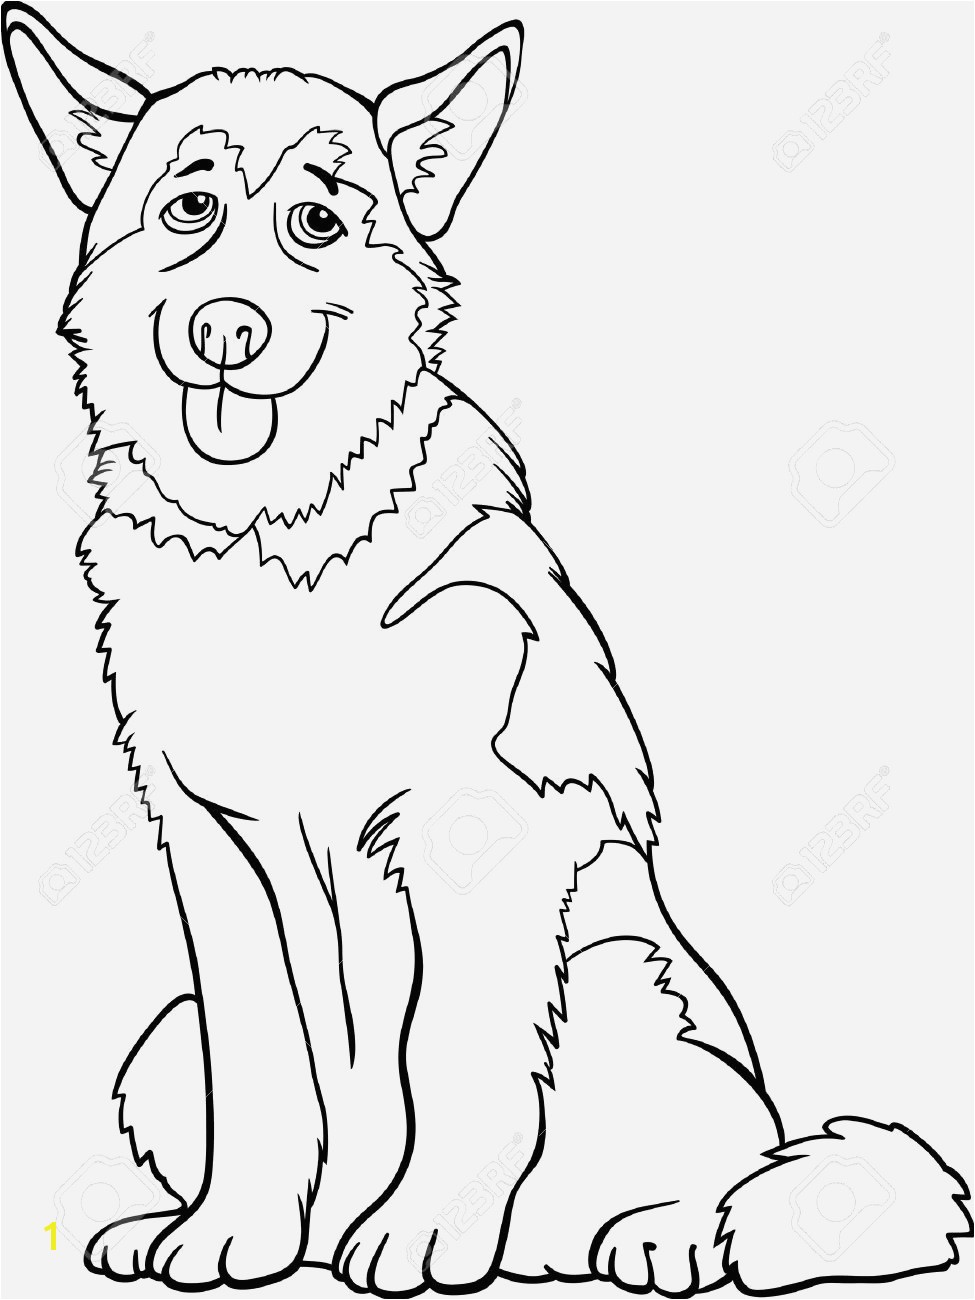 Free Coloring Pages Printable Animals Fresh Free Printable Coloring Pages Animals Husky Coloring 0d Free